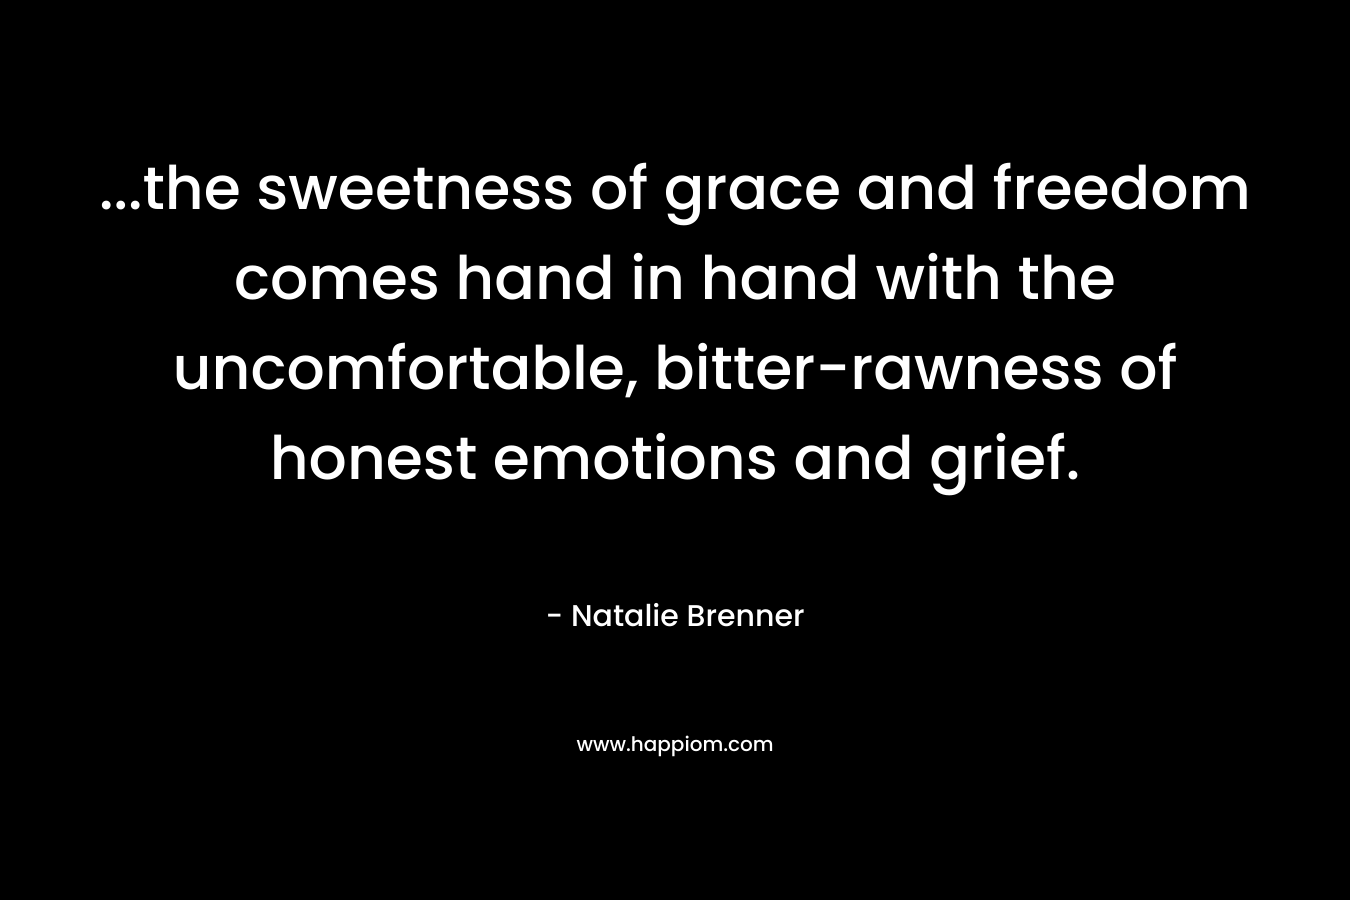 ...the sweetness of grace and freedom comes hand in hand with the uncomfortable, bitter-rawness of honest emotions and grief.